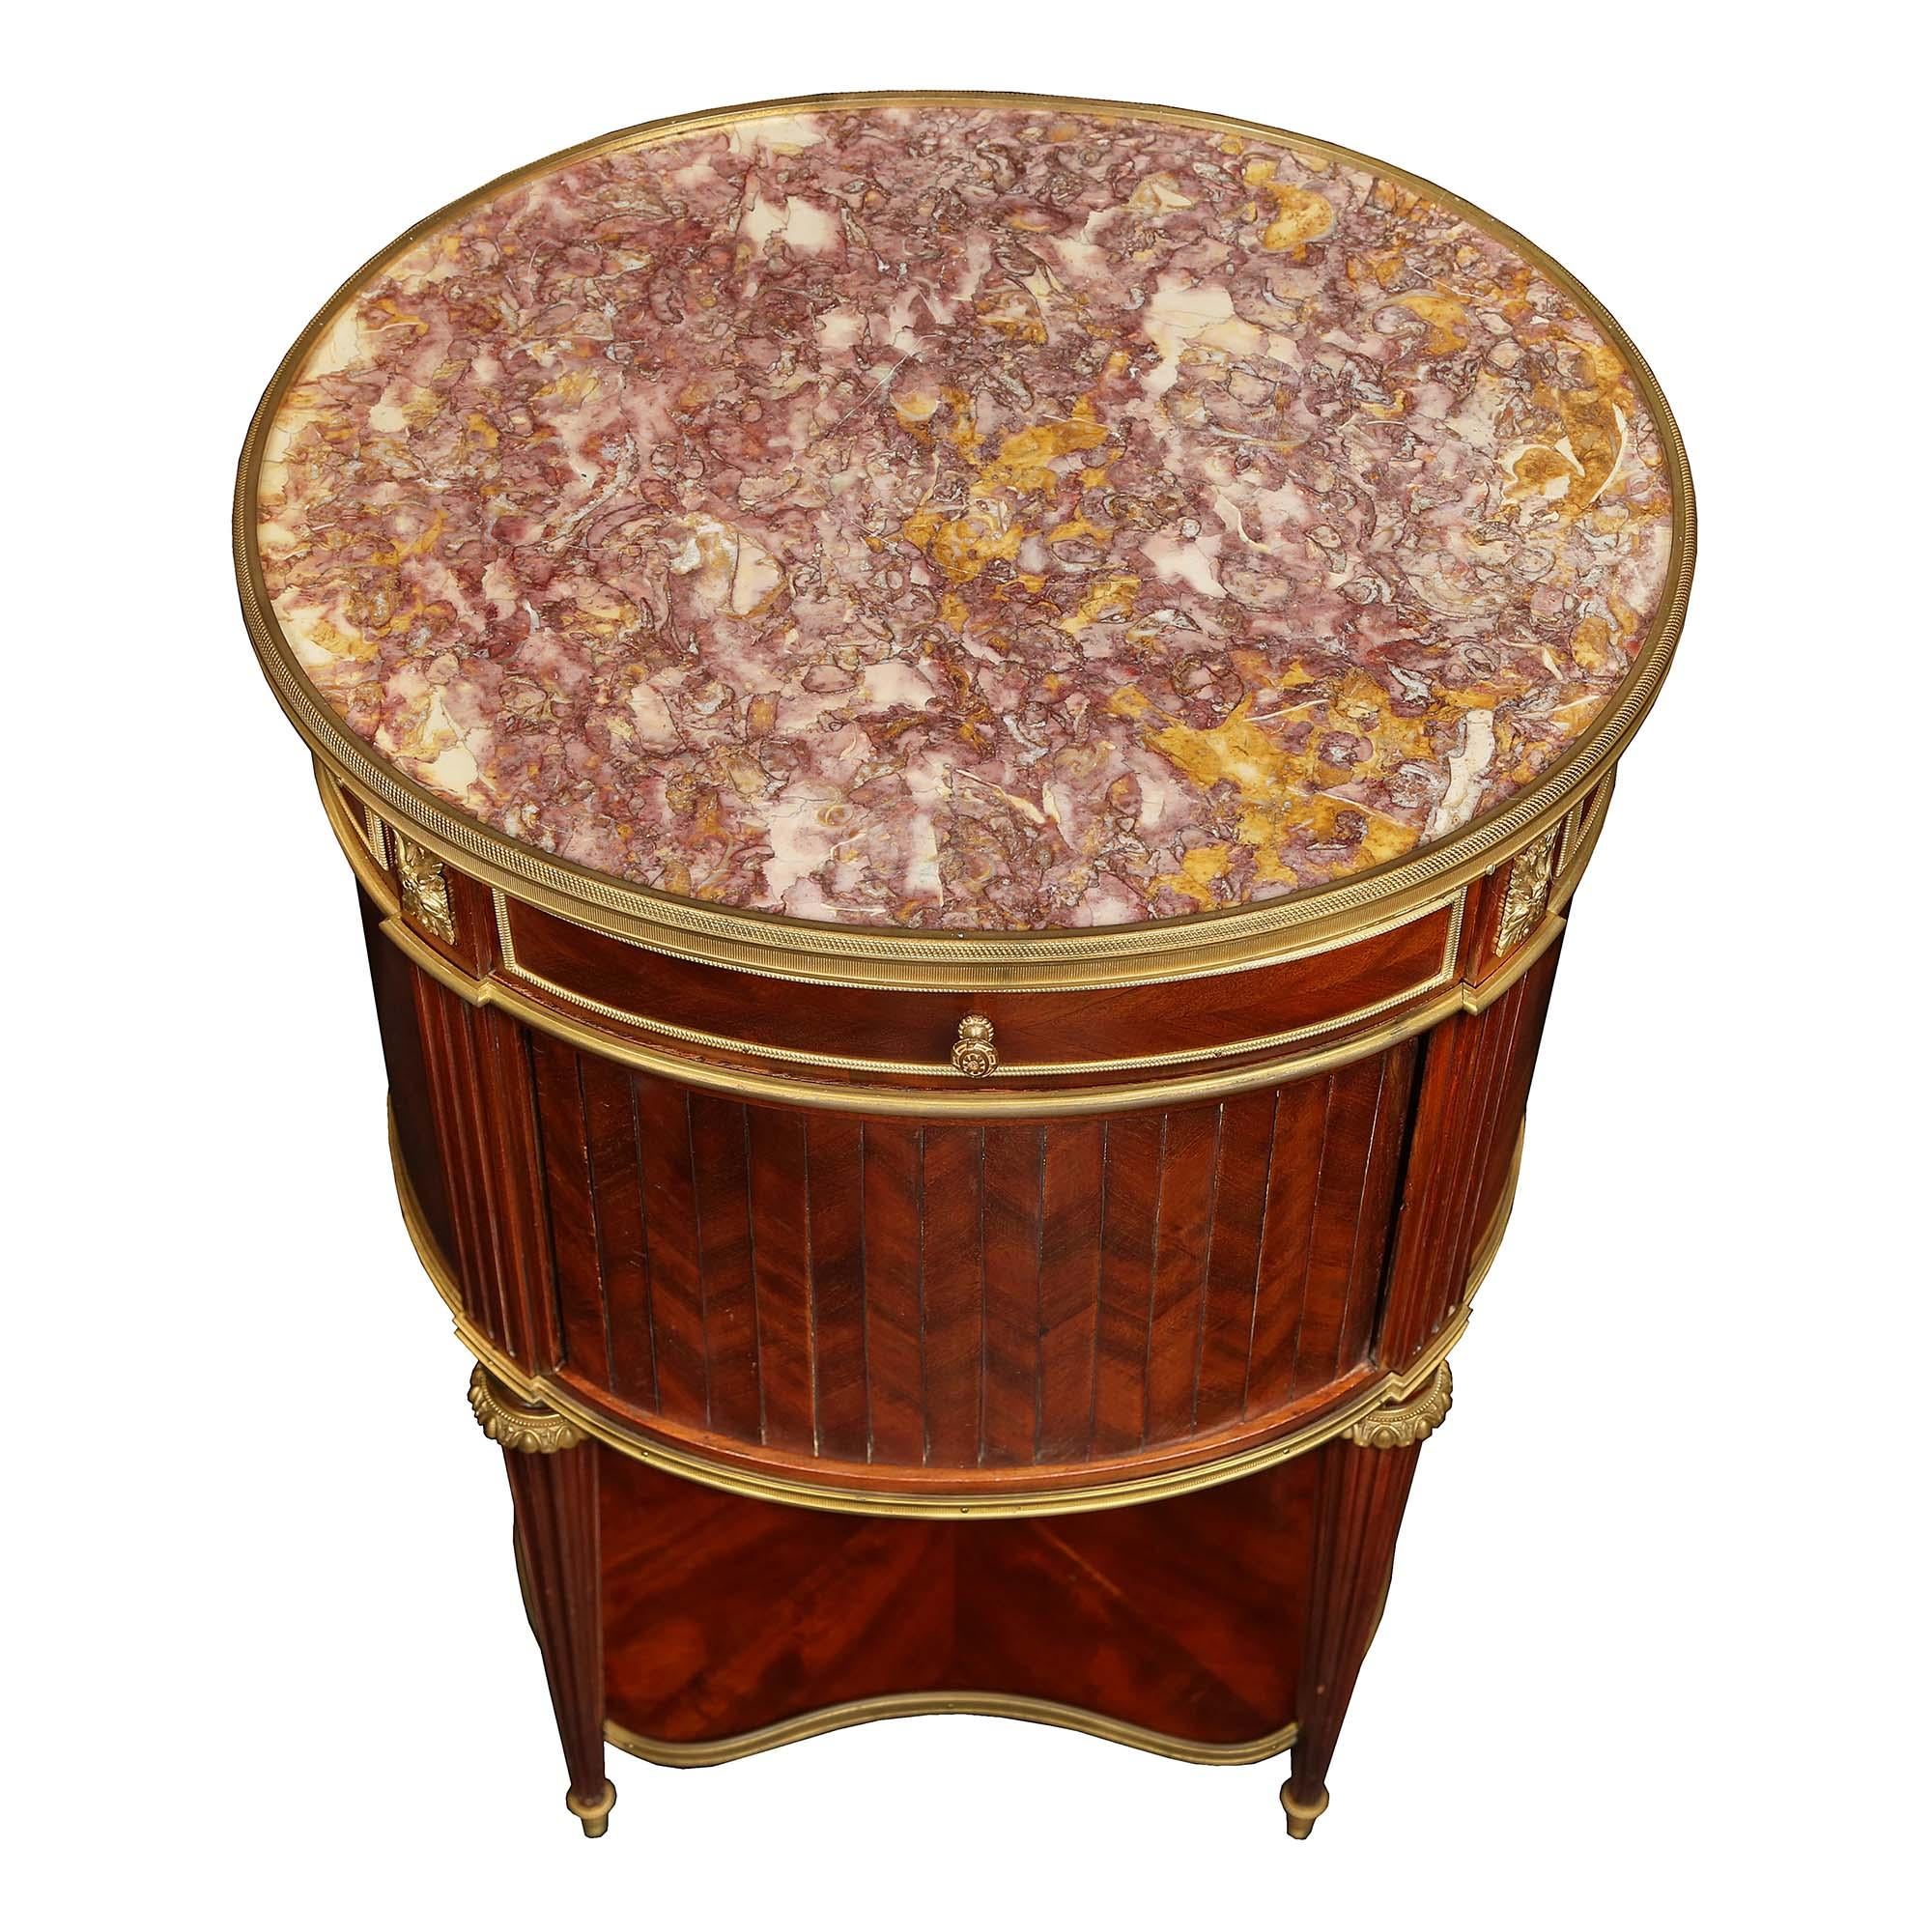 A very important French 19th century Louis XVI St. solid mahogany oval side table signed Brevete, circa 1880. The table is raised by four circular tapered fluted legs with ormolu sabots topped with ormolu bands. The legs are joined by a